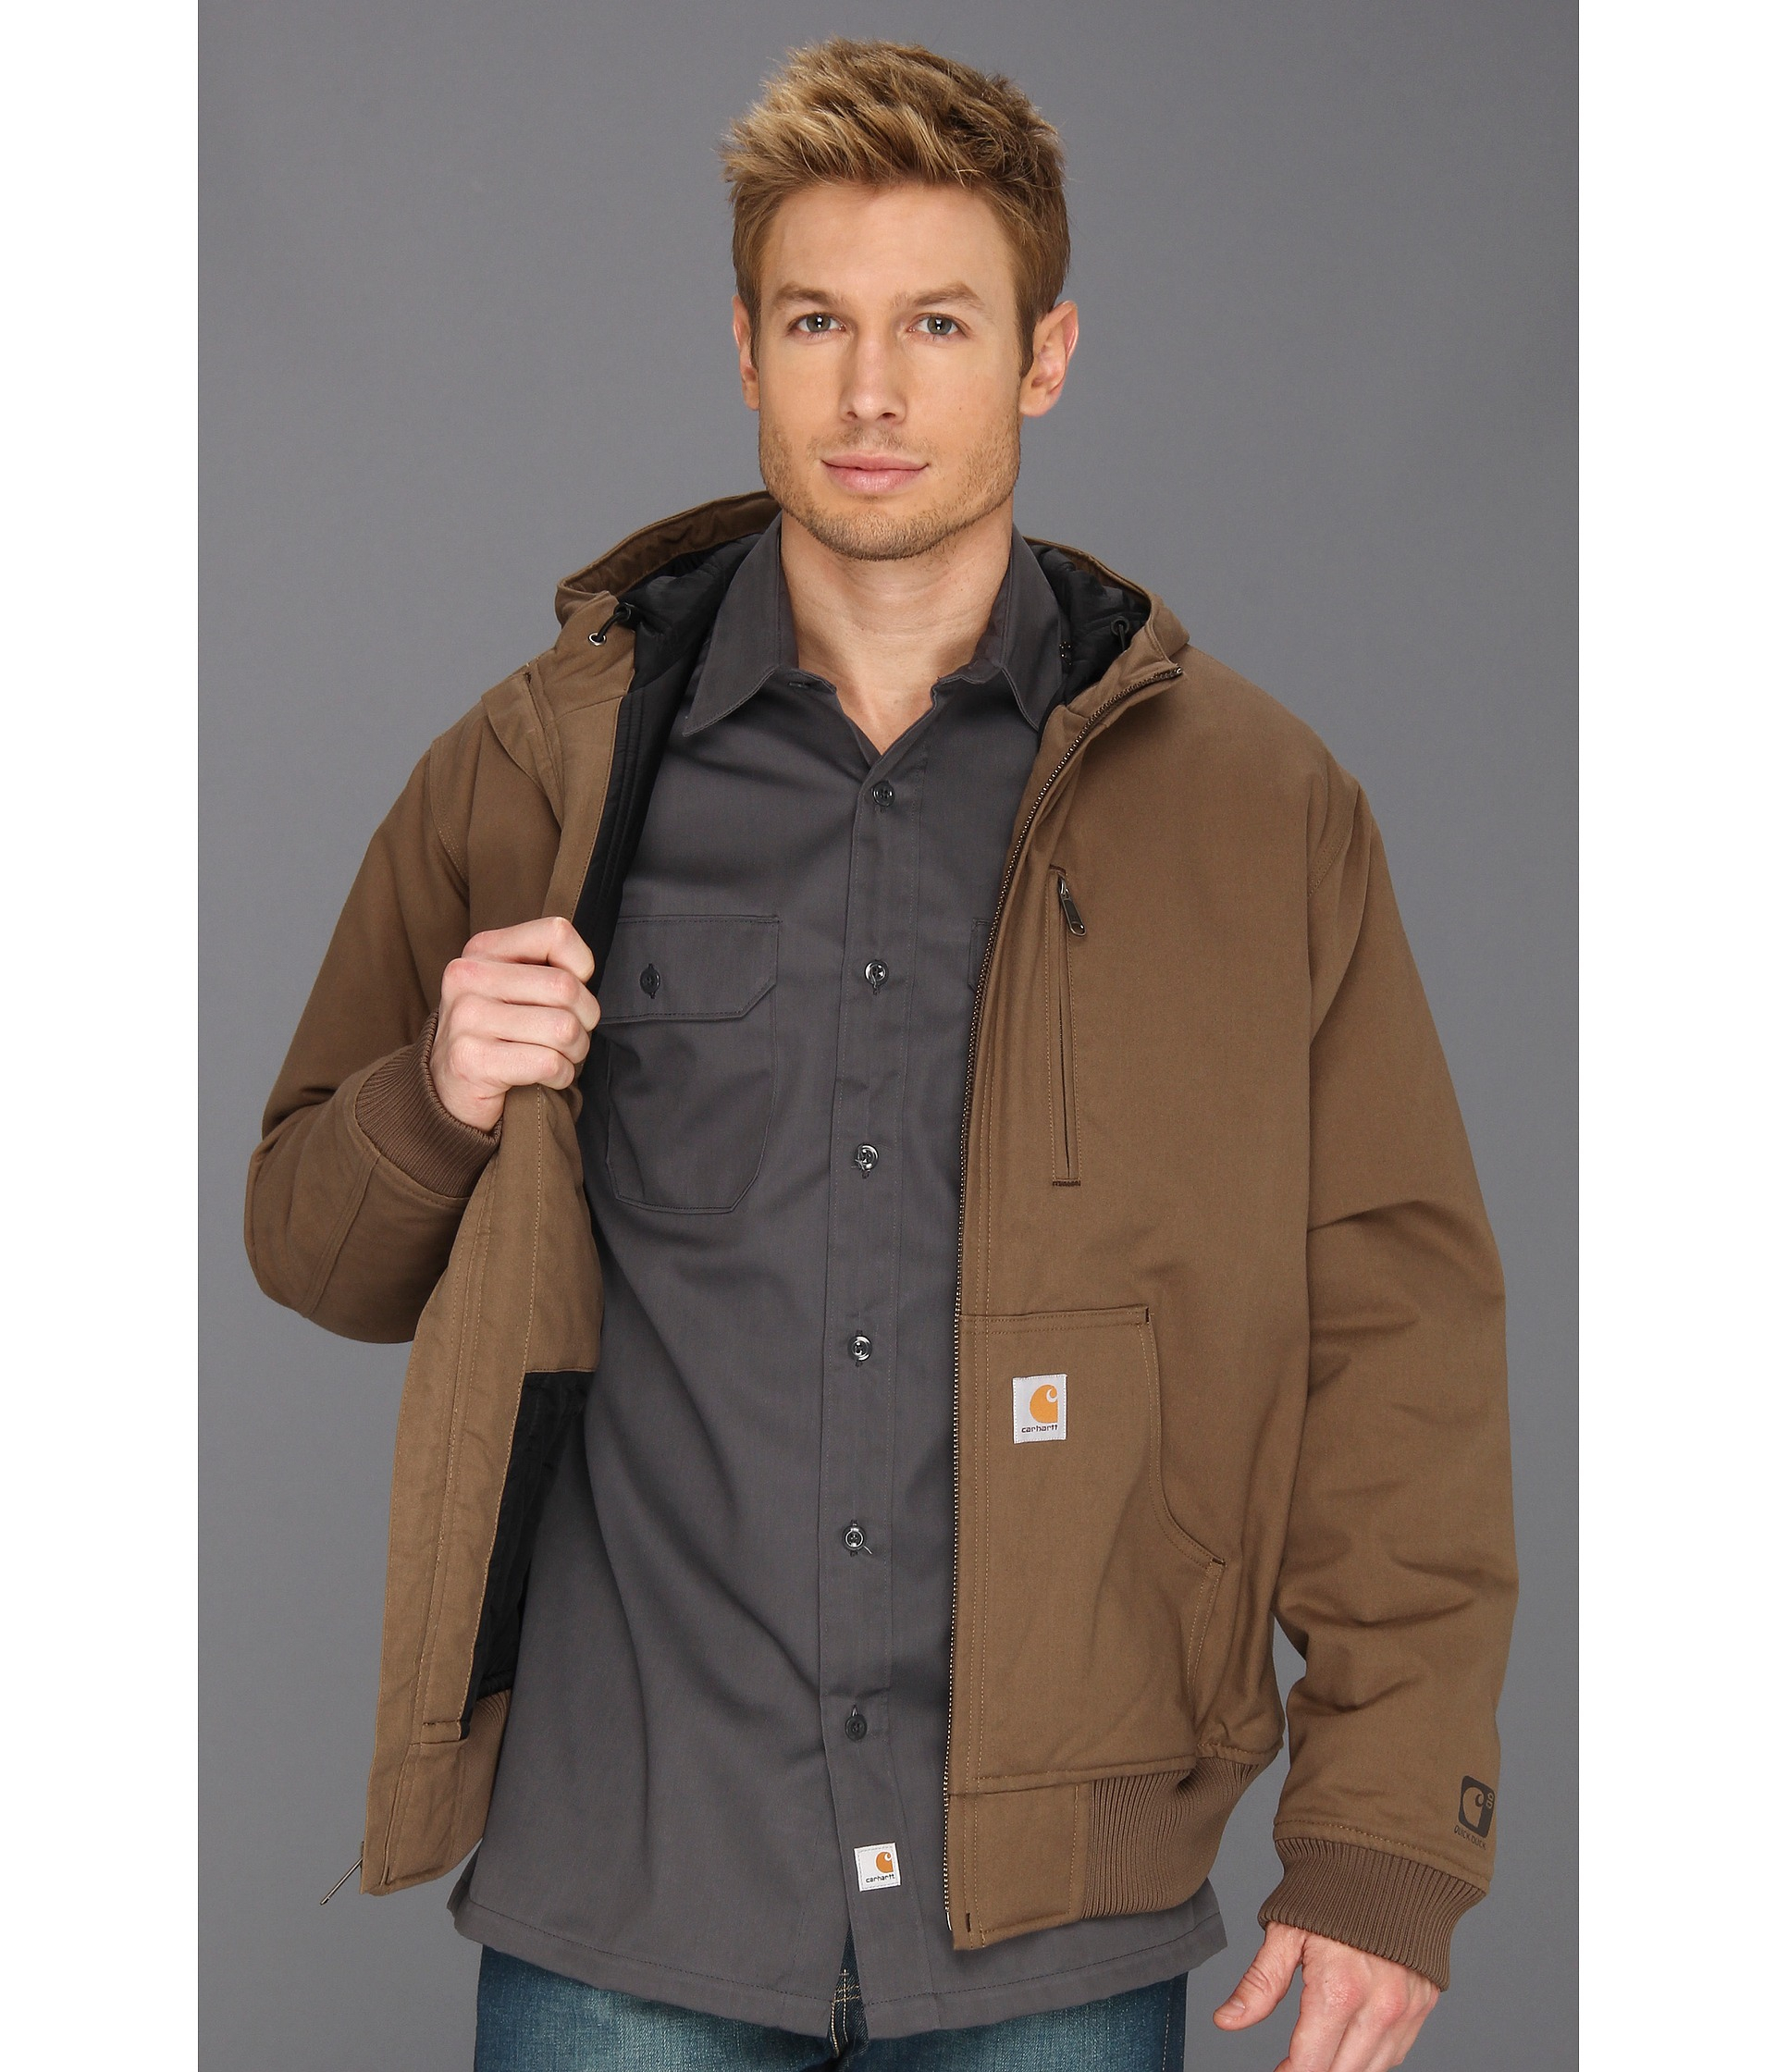 Lyst - Carhartt Quick Duck Woodward Active Jacket Tall in Brown for Men